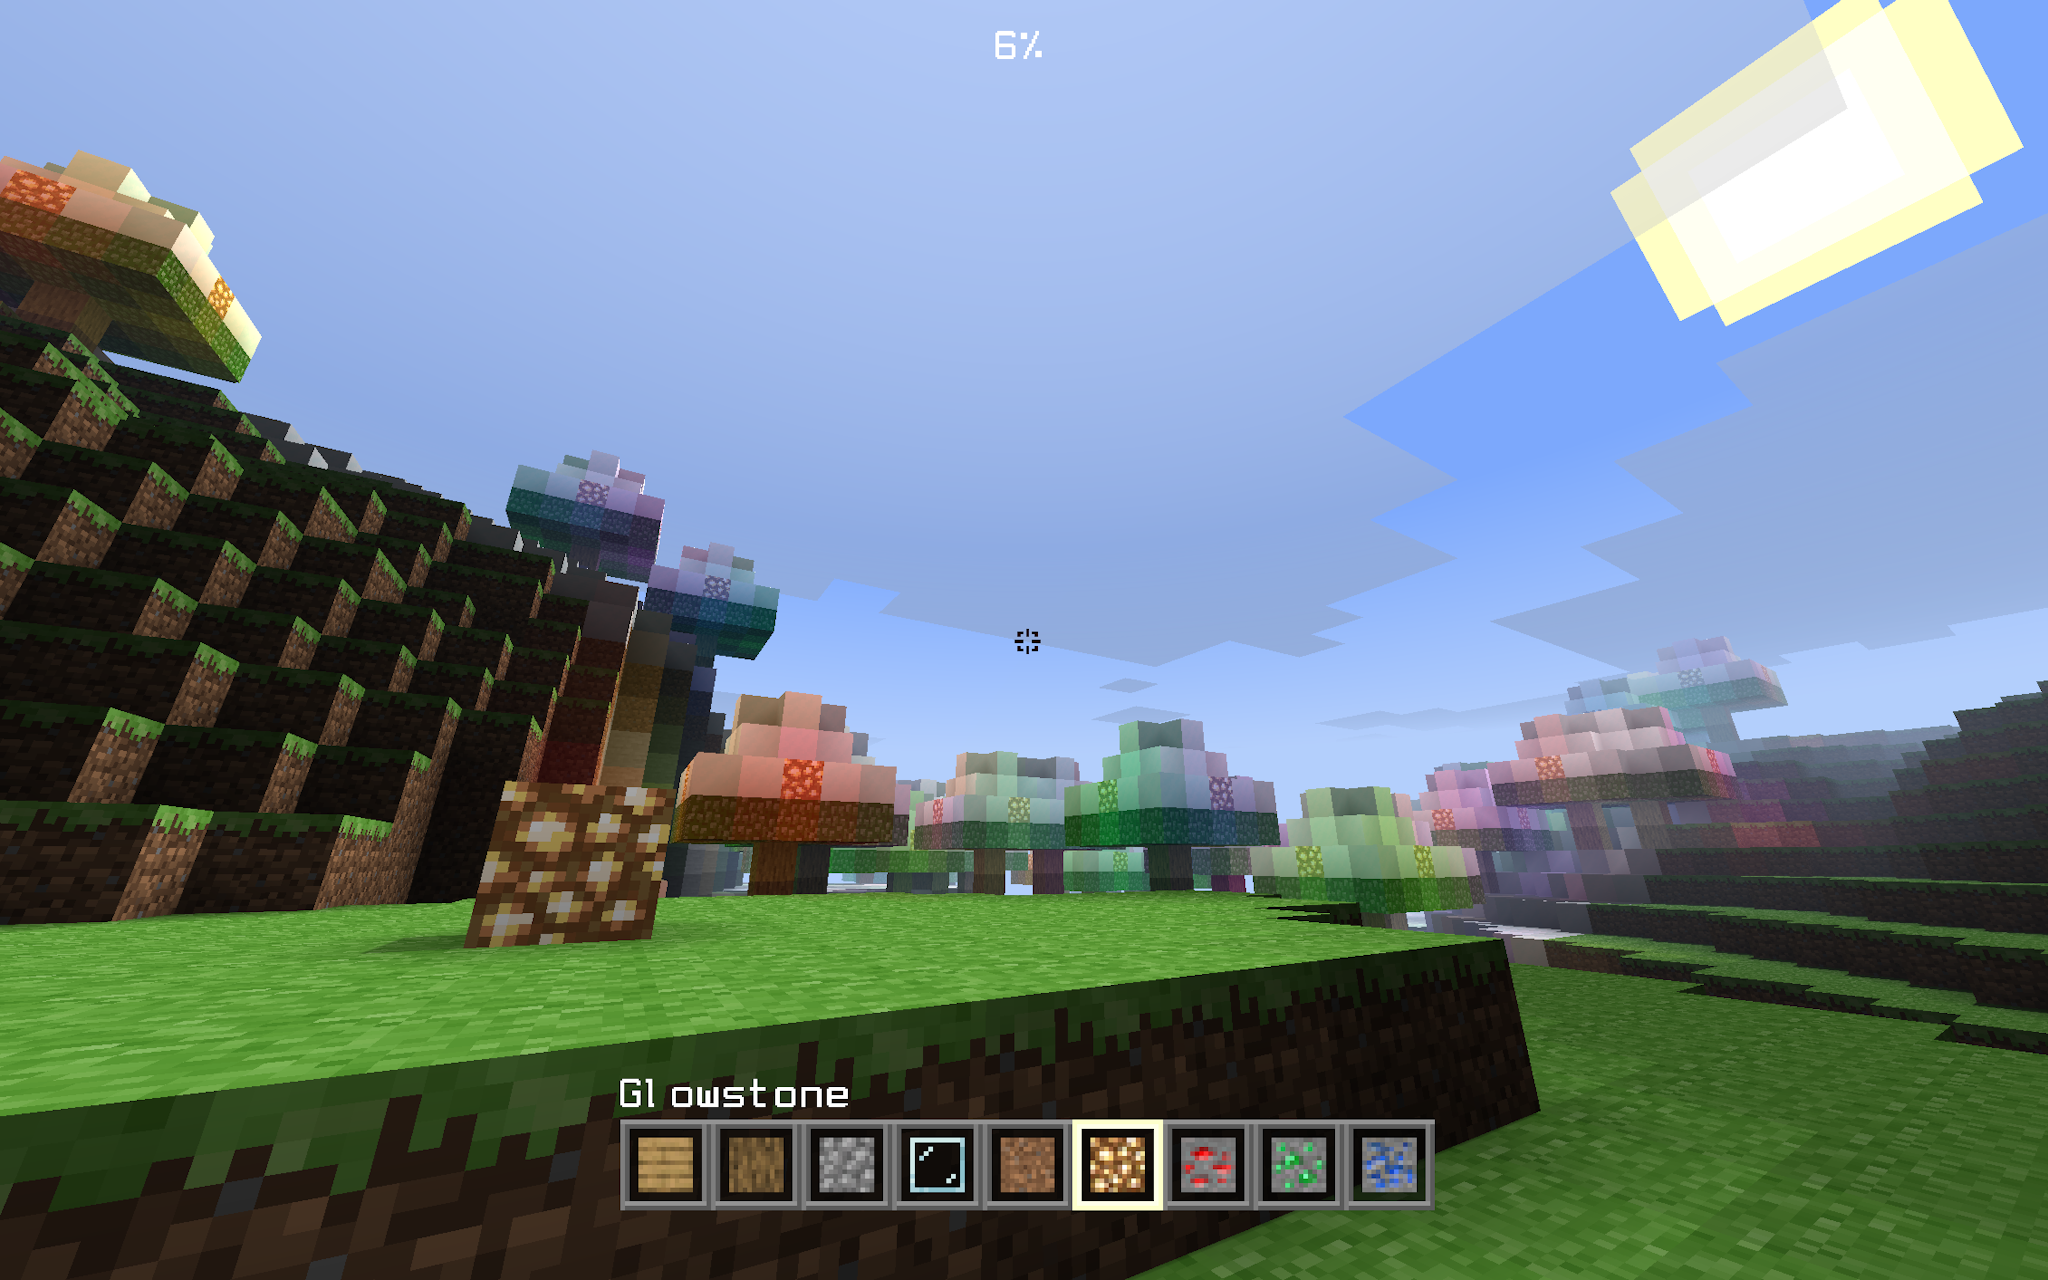 The sun is rising on a hill. Trees with colored lights are in the distance. Clouds are in the sky. The player has glowstone selected in their hotbar.